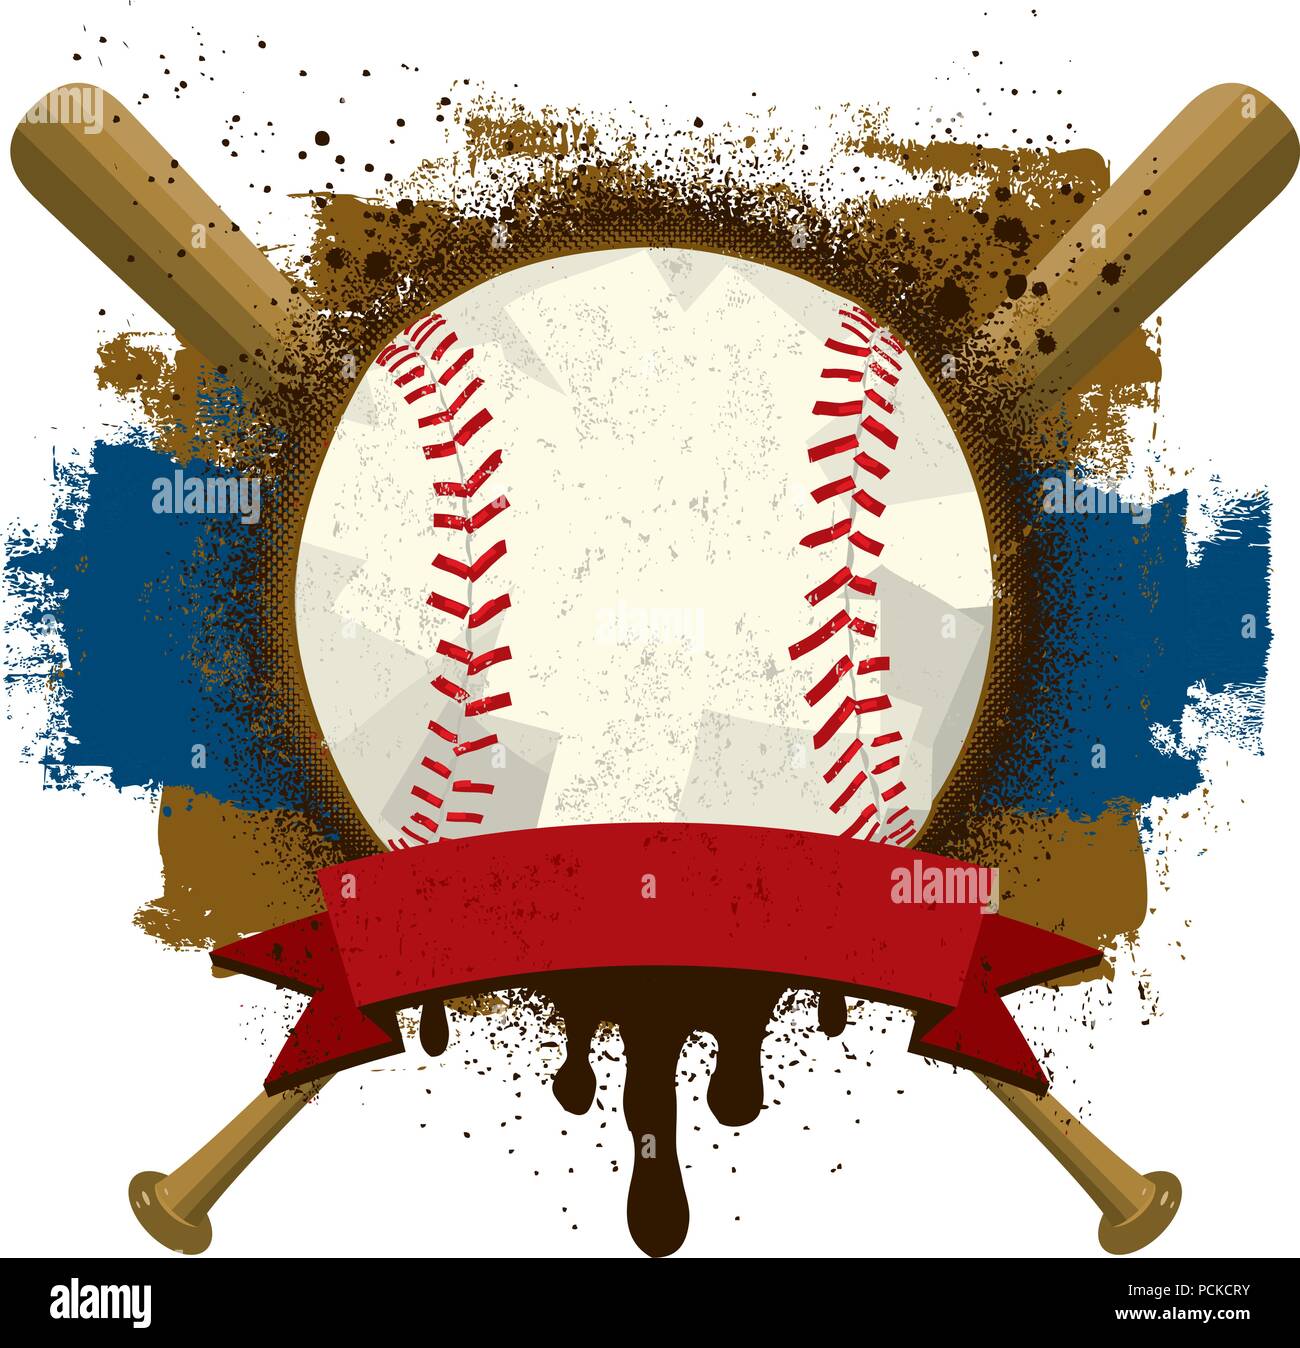 Baseball Insignia A baseball with a text banner over baseball bats and a grunge background. Stock Vector